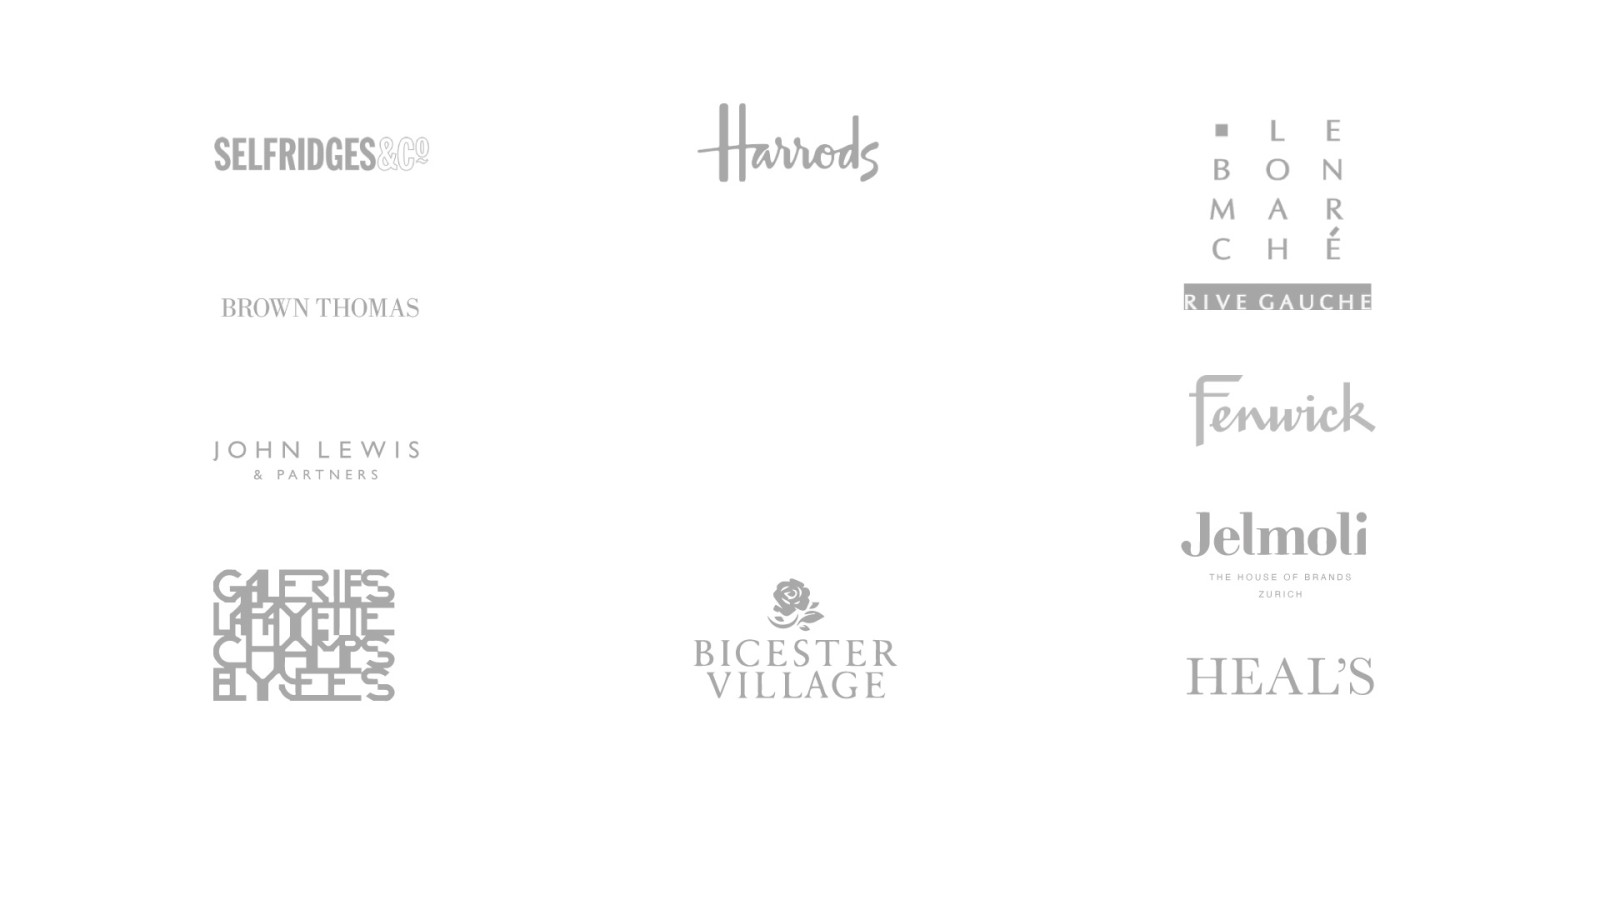 A Selection Of The Brands We Work With...